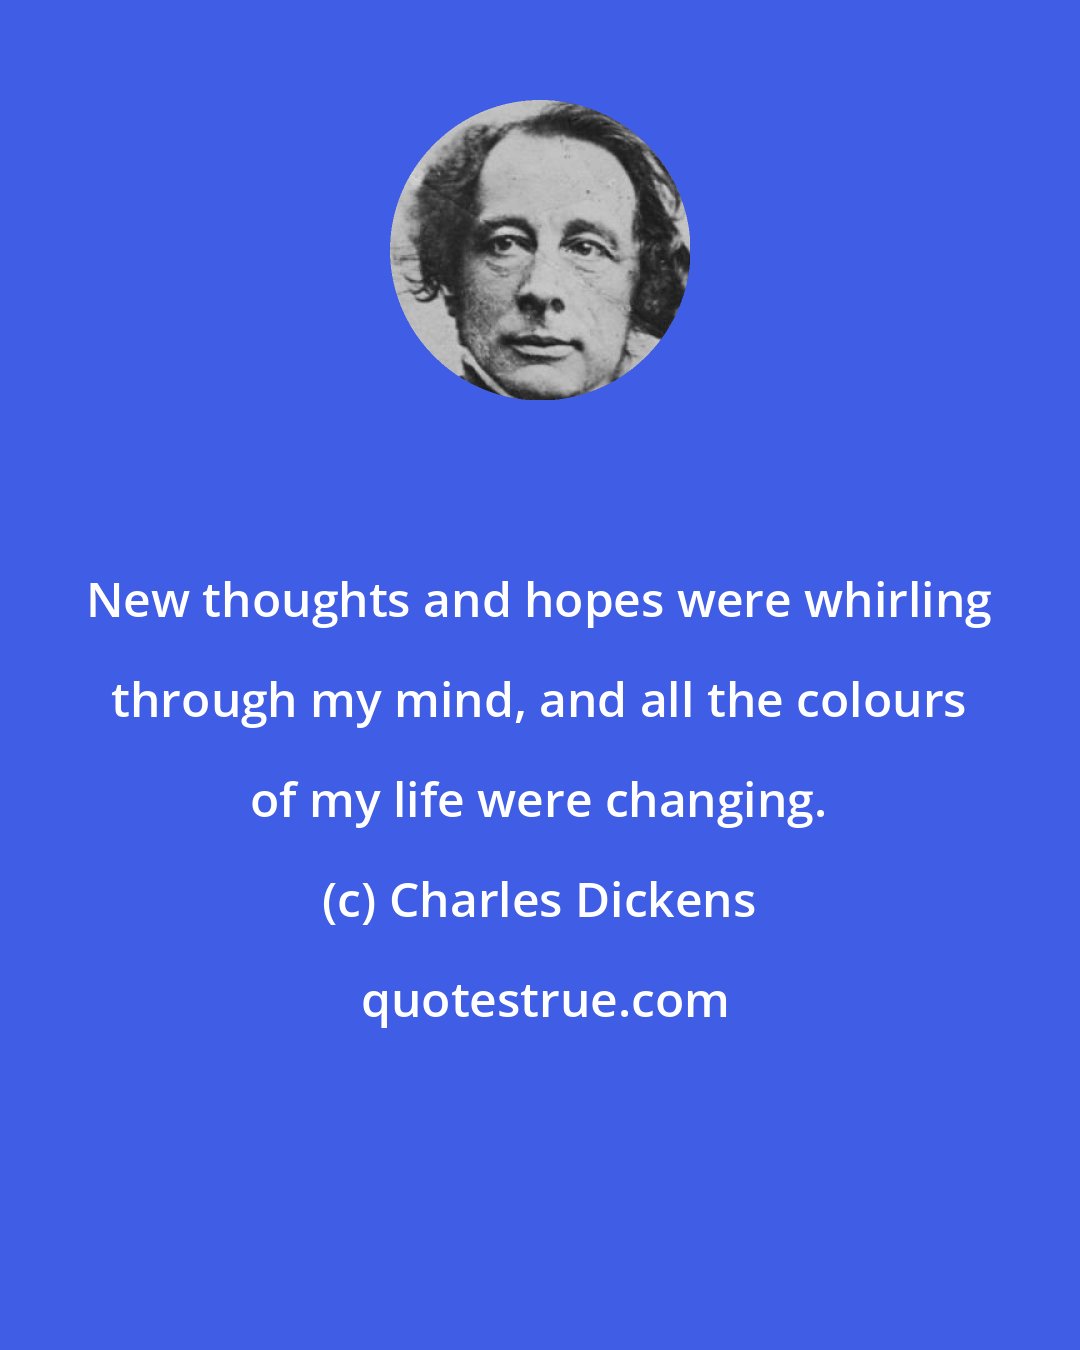 Charles Dickens: New thoughts and hopes were whirling through my mind, and all the colours of my life were changing.